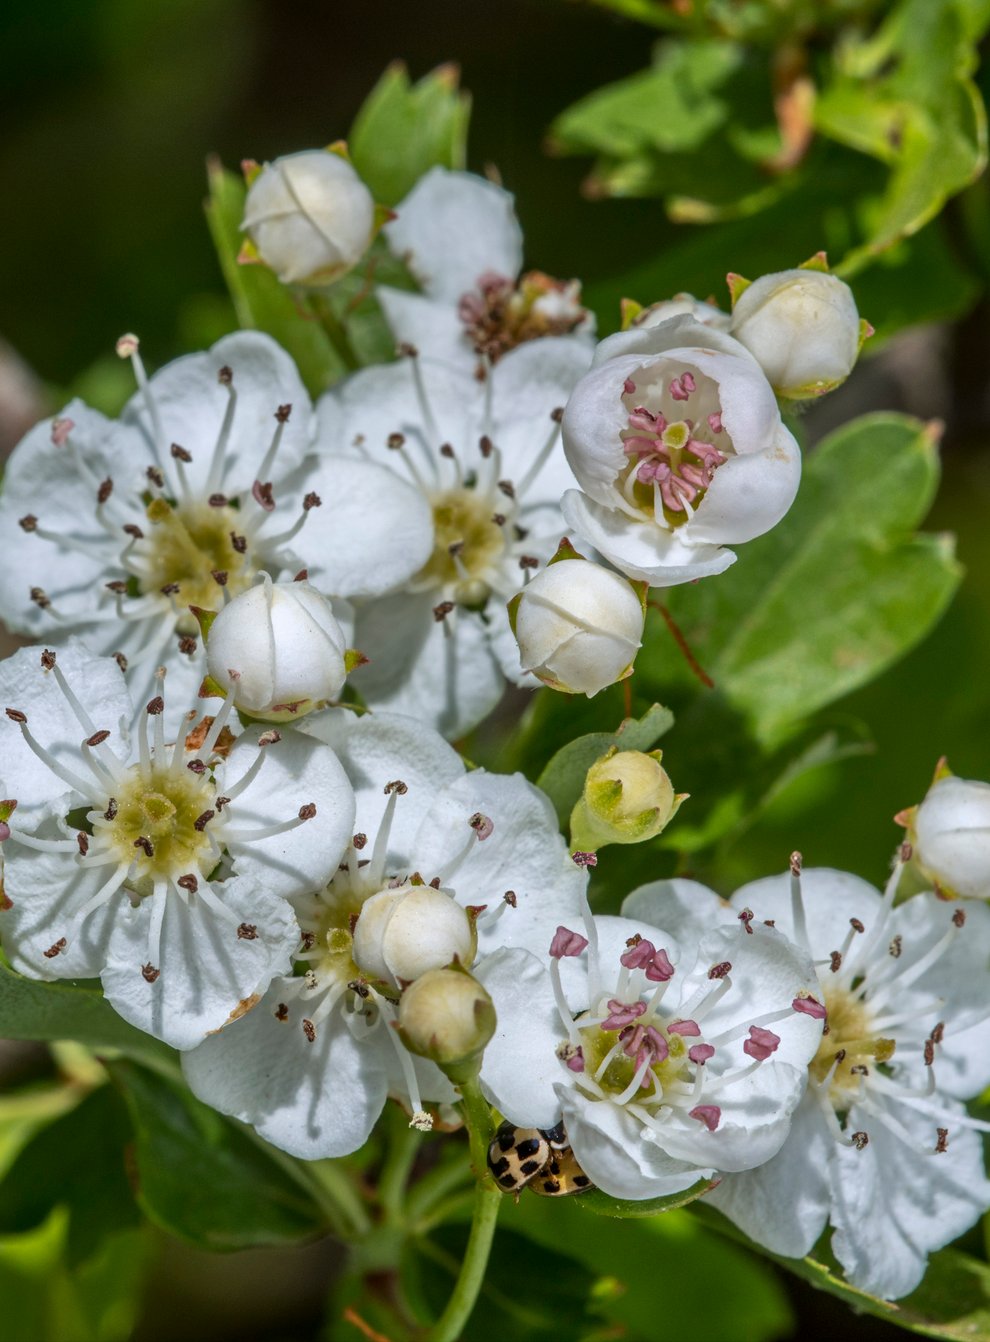 Hawthorn blossom in spring (iStock/PA)